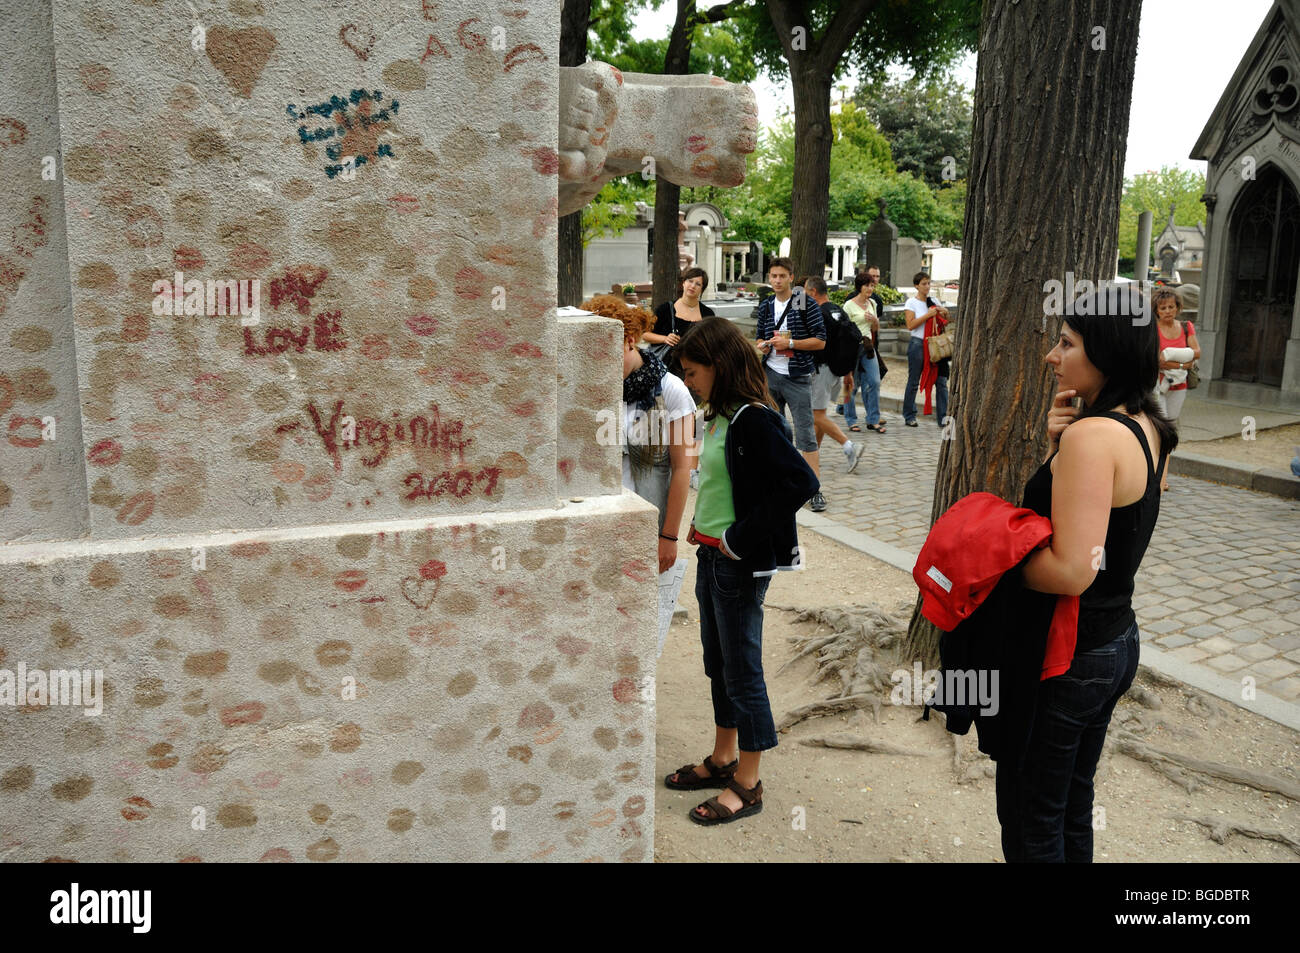 Tourists or Visitors & Lipstick Kisses on the Oscar Wilde Tomb, Pere Lachaise Cemetery, Paris, France Stock Photo